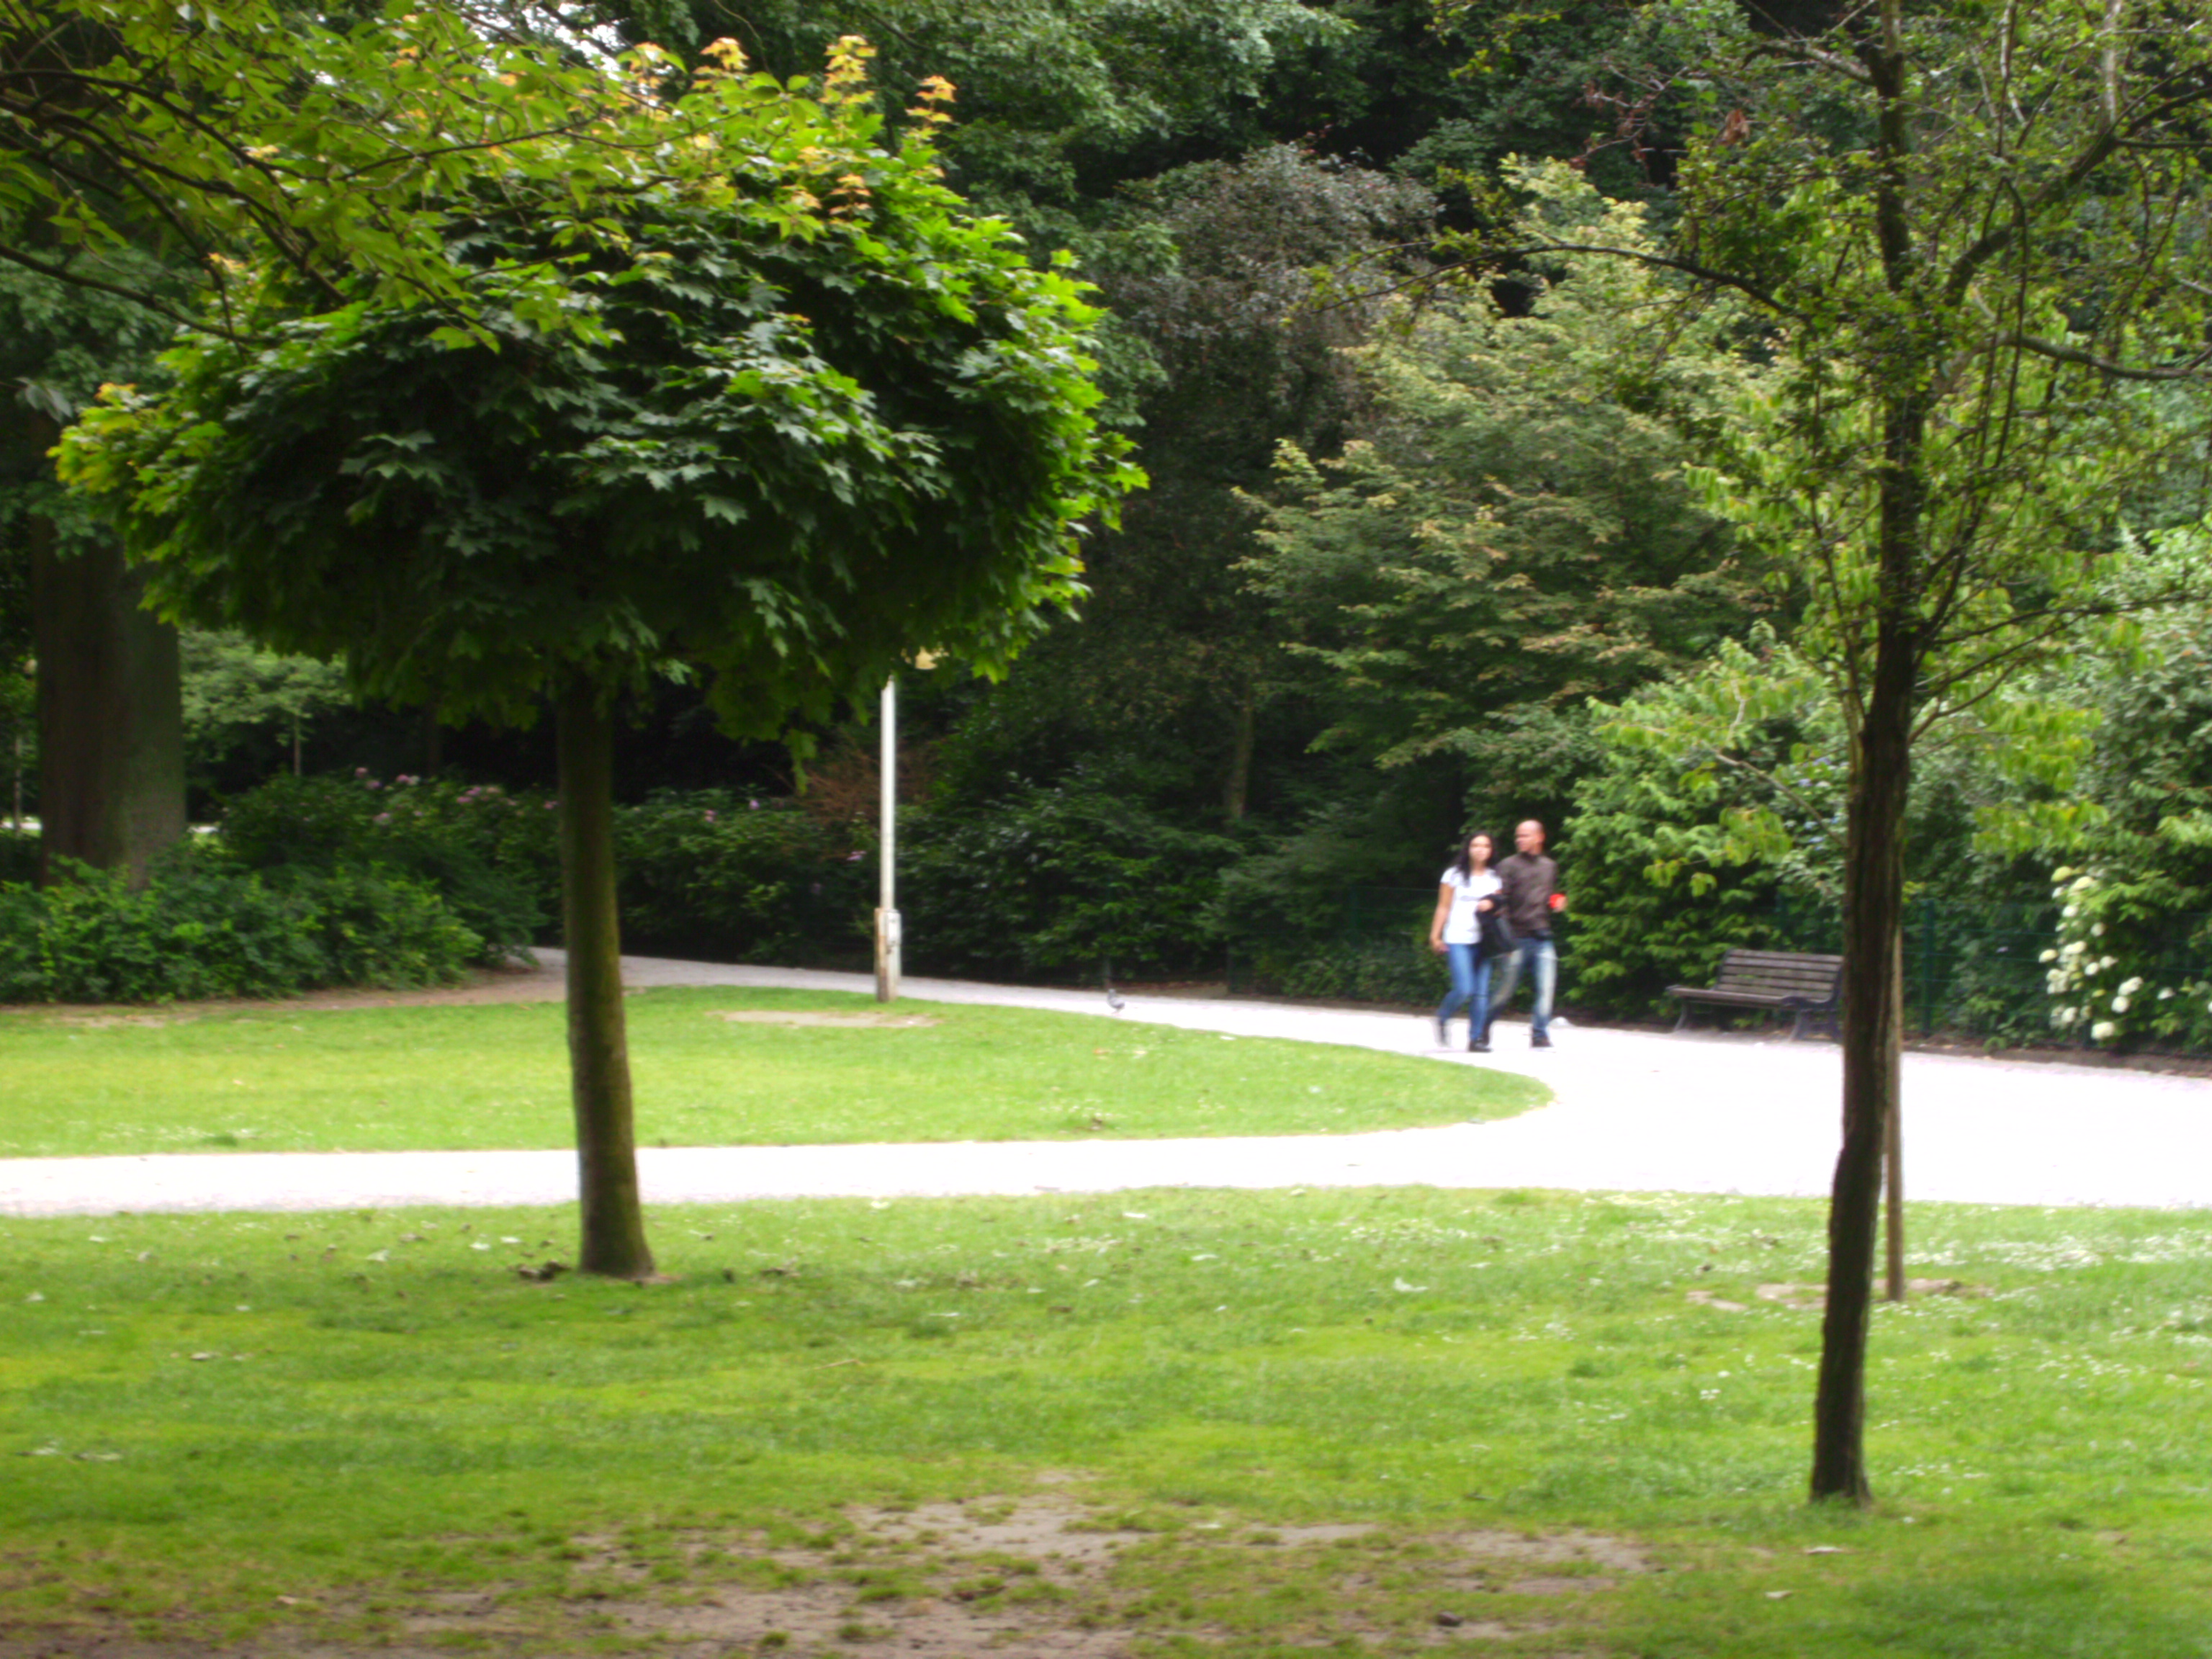 File:A Walk in the park.JPG - Wikimedia Commons